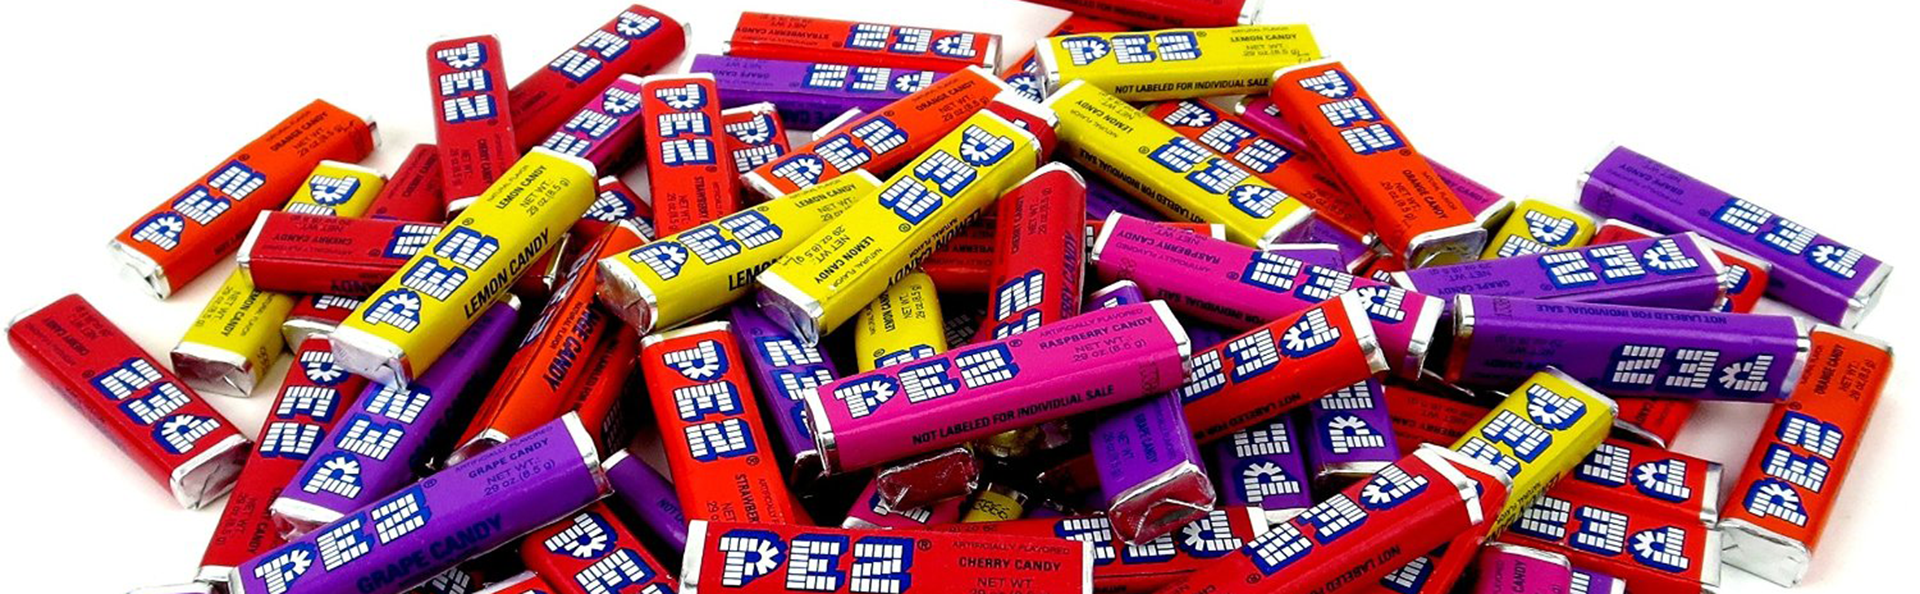 Pez Candy Png - Pez Candy Png Hdpng.com 1920, Transparent background PNG HD thumbnail